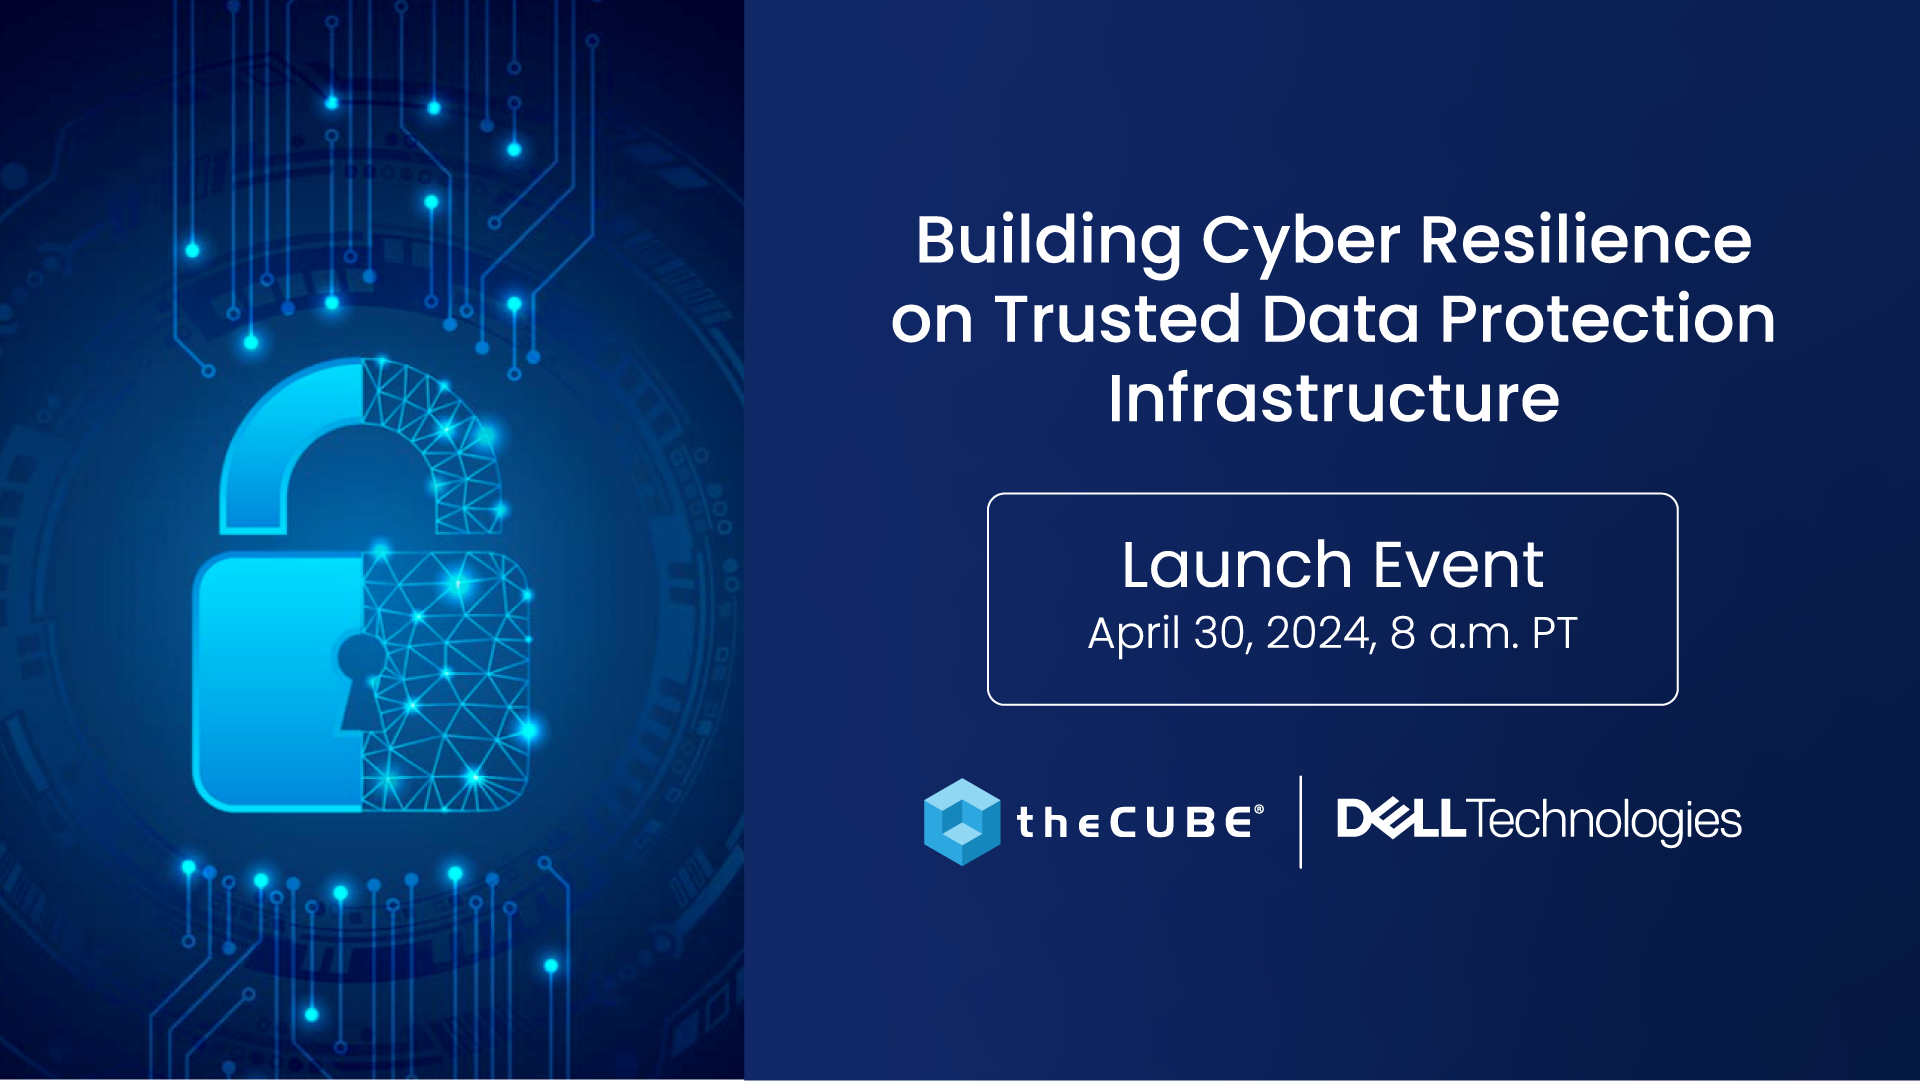 TheCUBE, SiliconANGLE Media’s livestreaming studio and Dell Technologies Inc. will present a special broadcast, “Building Cyber Resilience on Trusted Data Protection Infrastructure